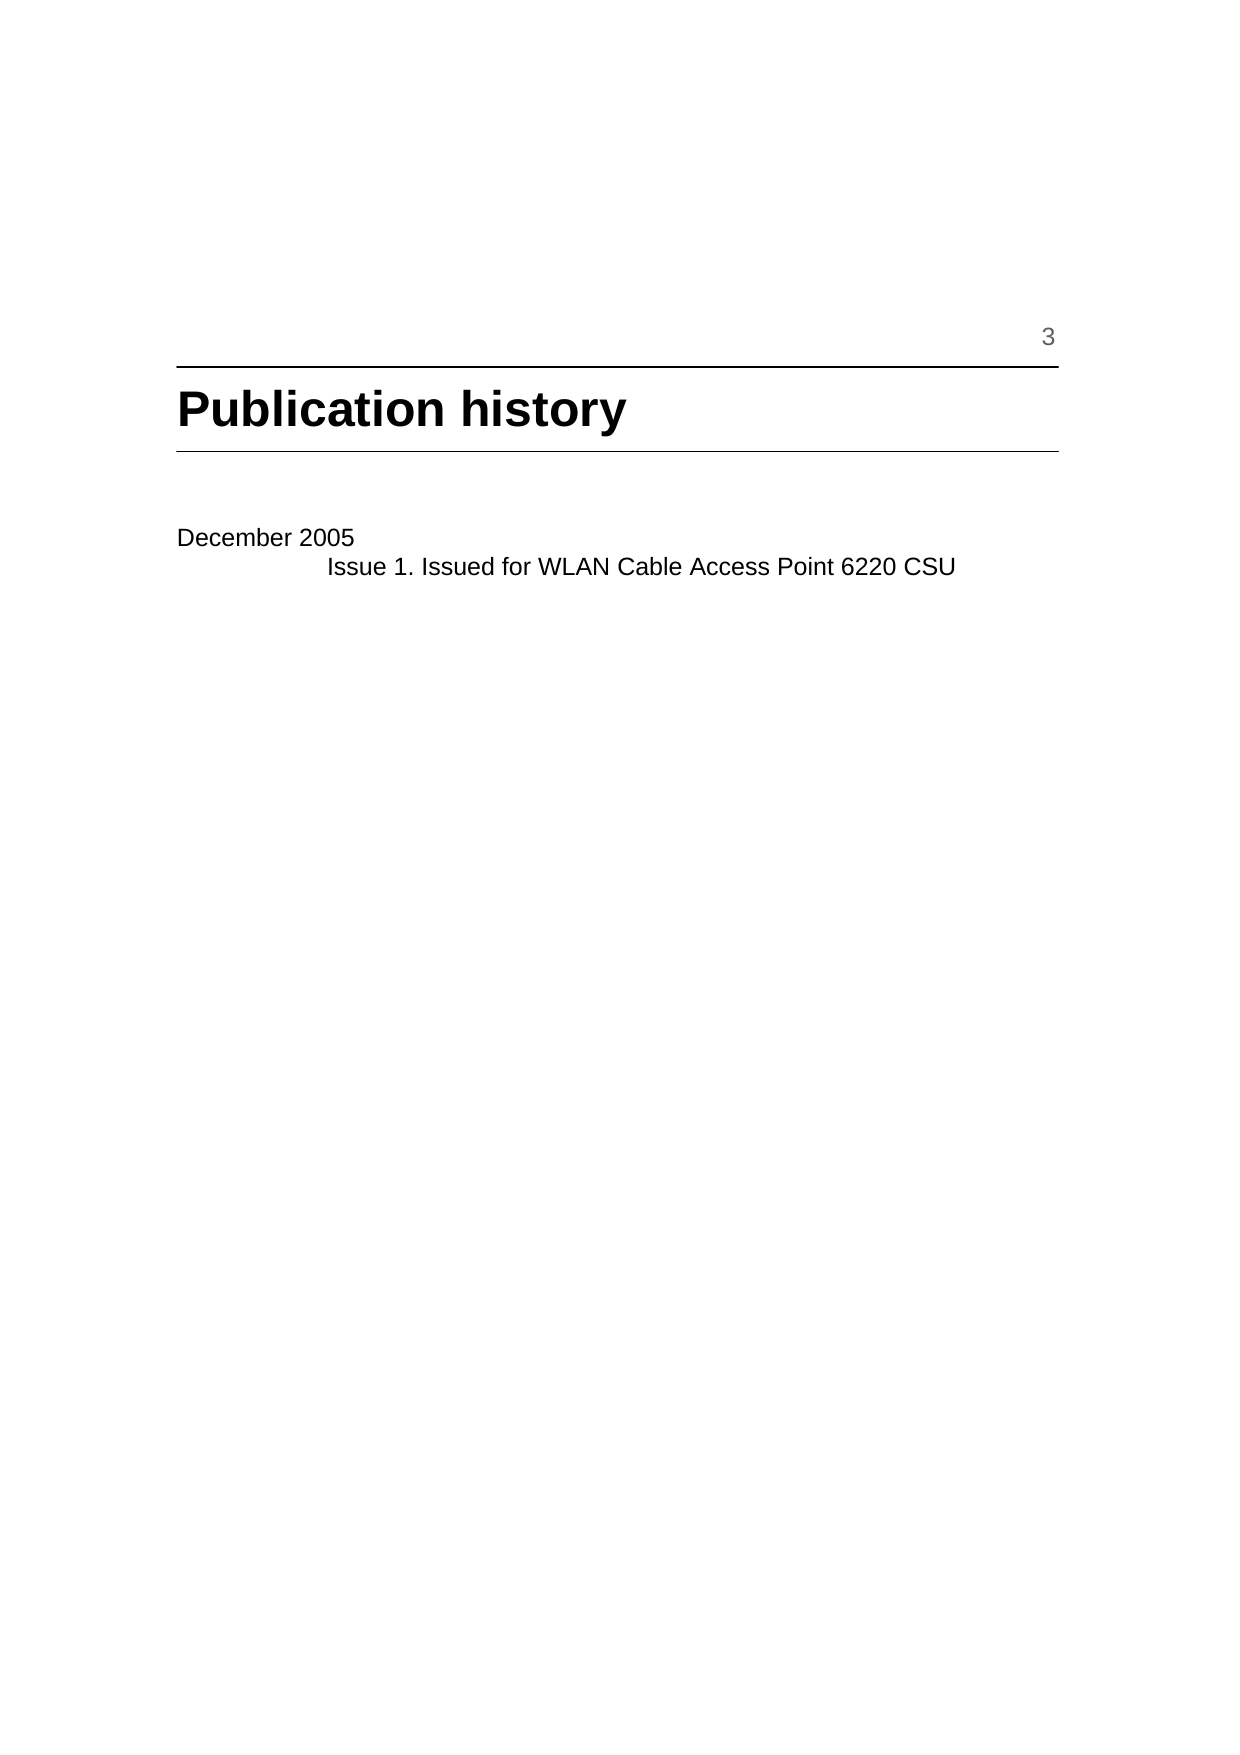     3  Publication history    December 2005     Issue 1. Issued for WLAN Cable Access Point 6220 CSU                                 